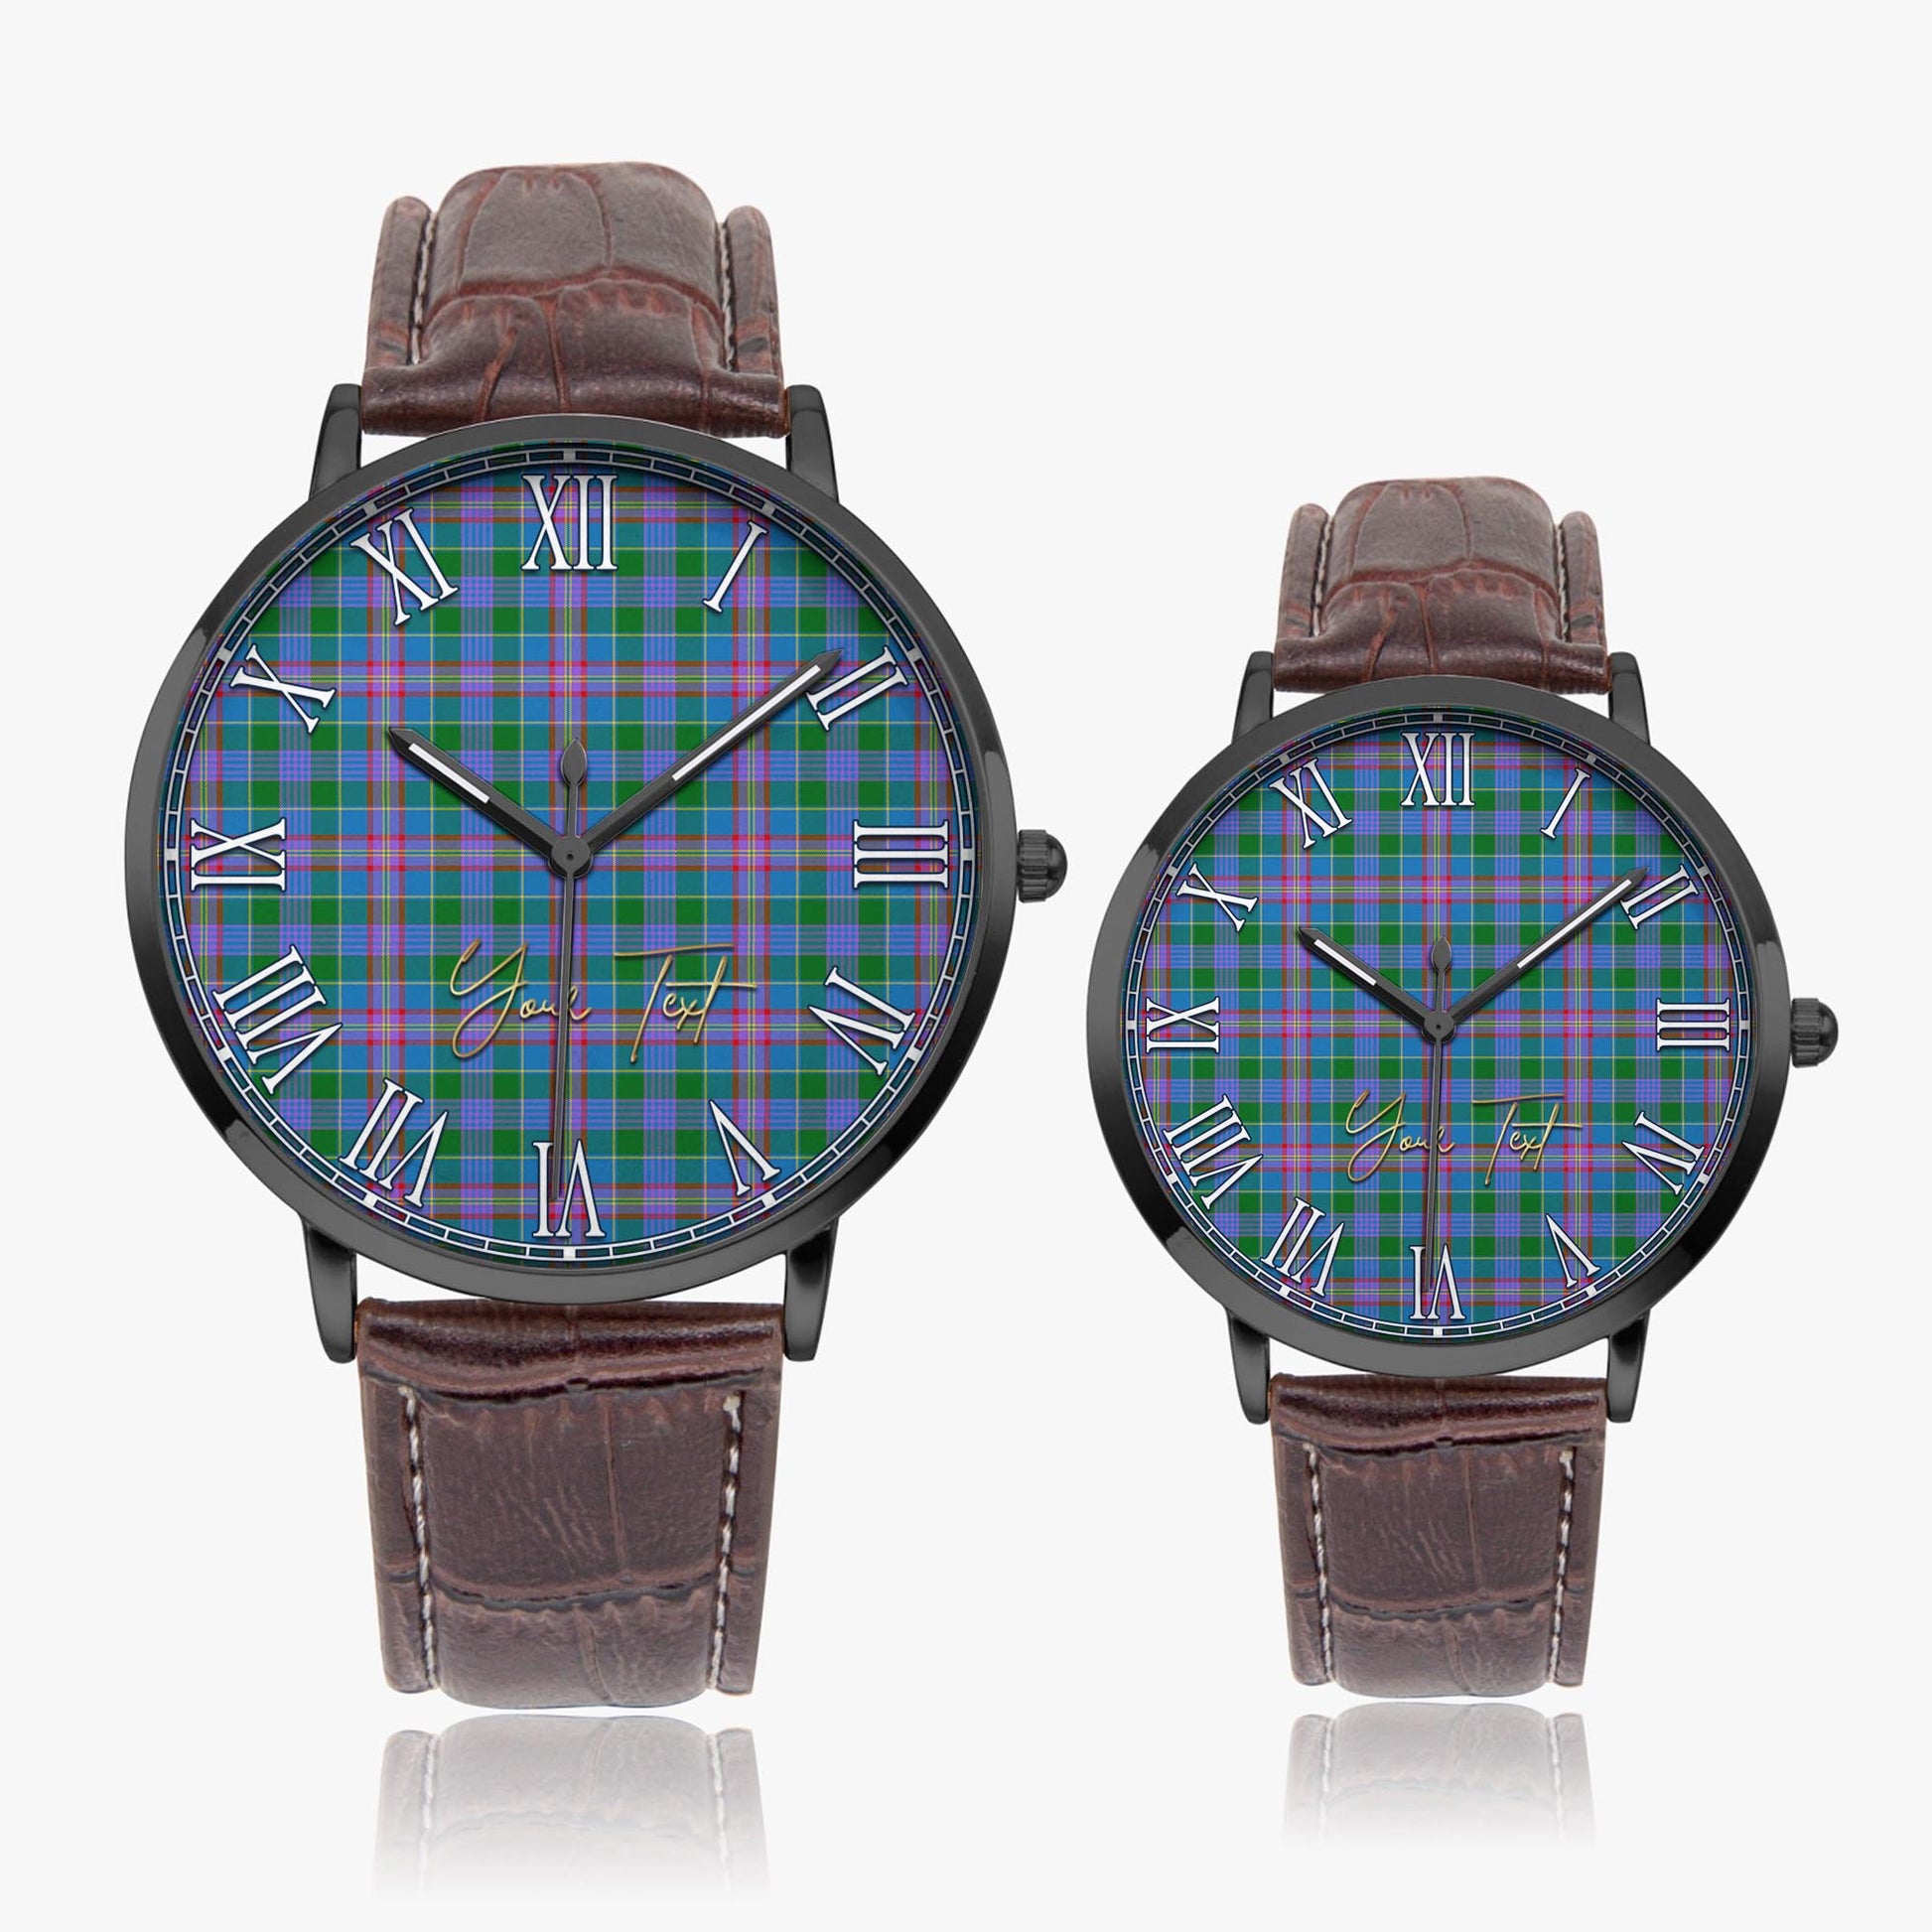 Ralston Tartan Personalized Your Text Leather Trap Quartz Watch Ultra Thin Black Case With Brown Leather Strap - Tartanvibesclothing